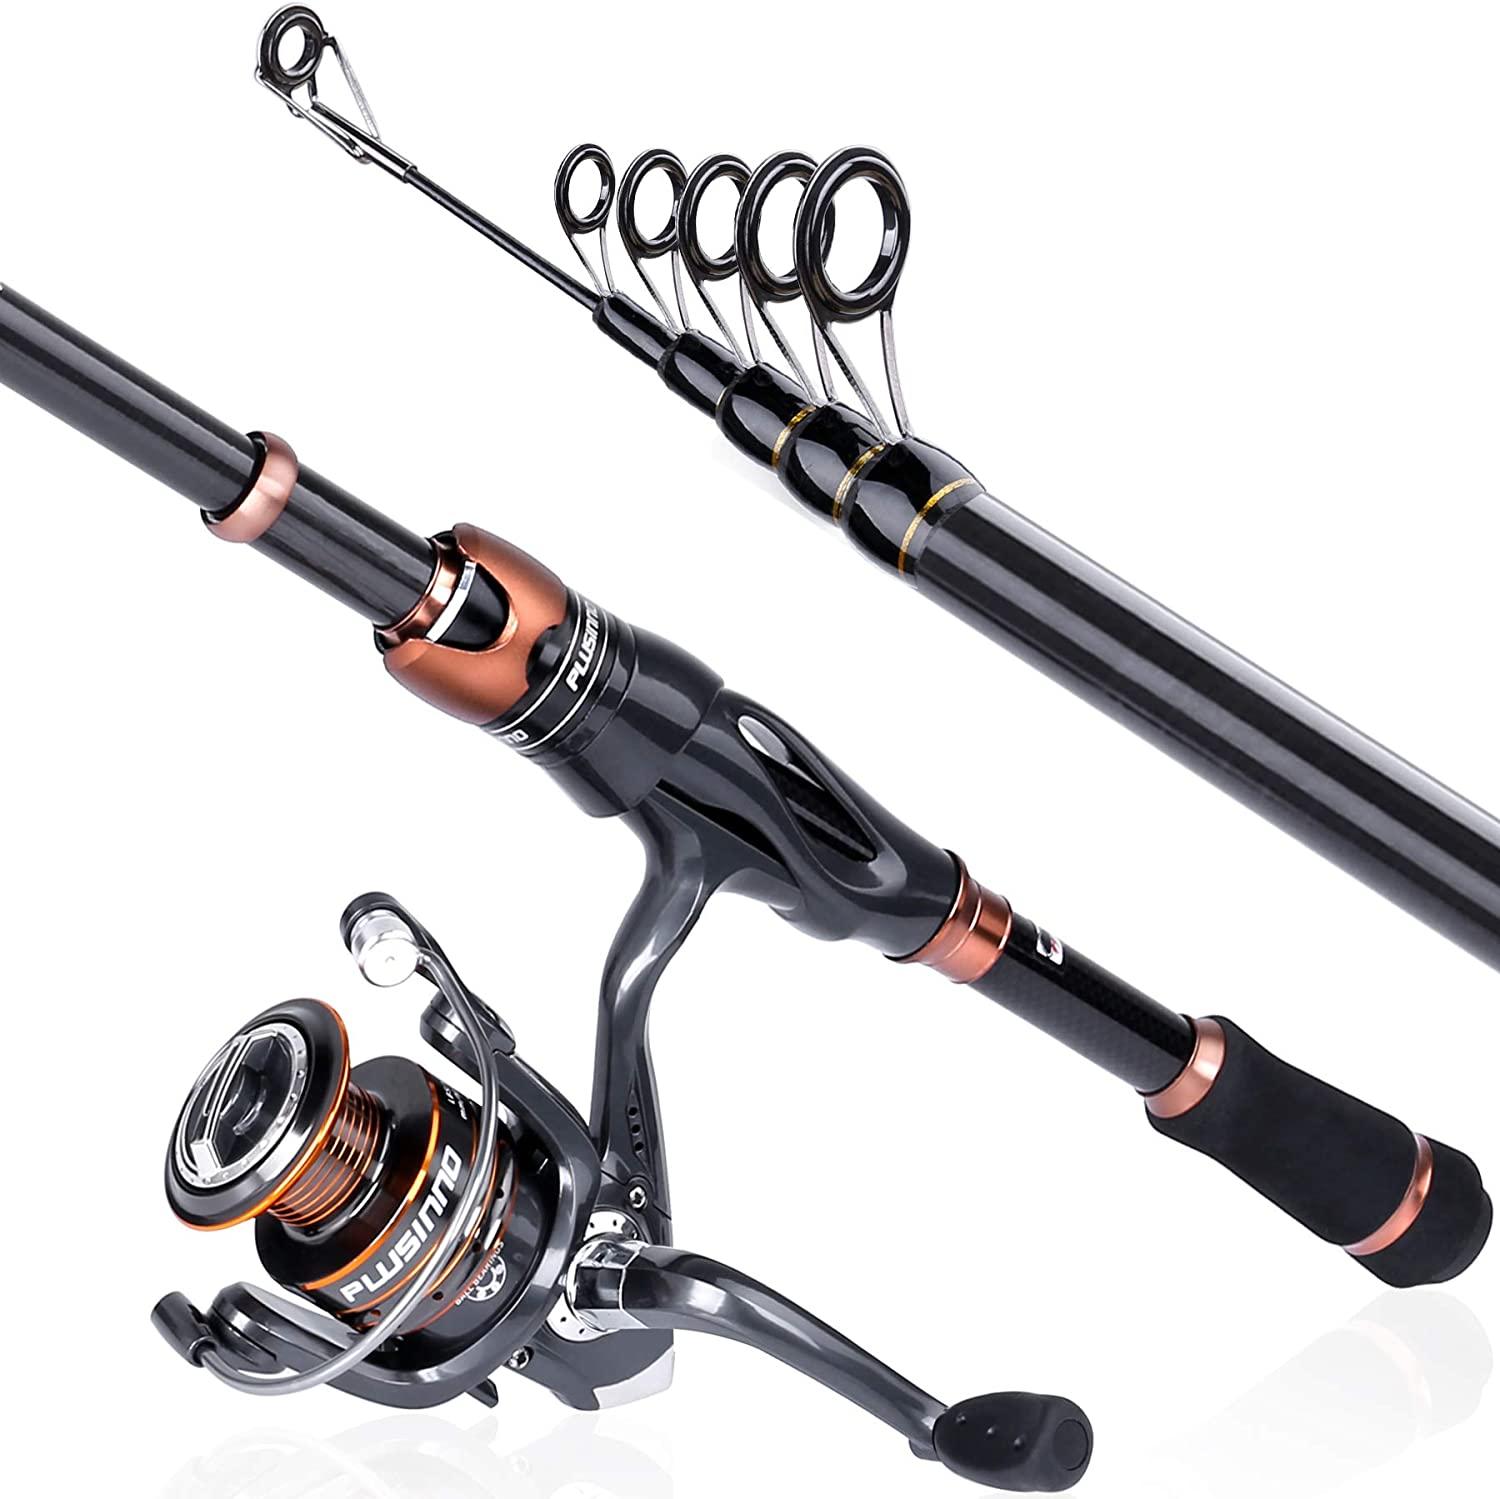 Fishing Rod and Reel Combos Carbon Matrix Telescopic Fishing Rod Pole  Saltwater and Freshwater Fishing Gear Kit (2.7m/6festival 5000)